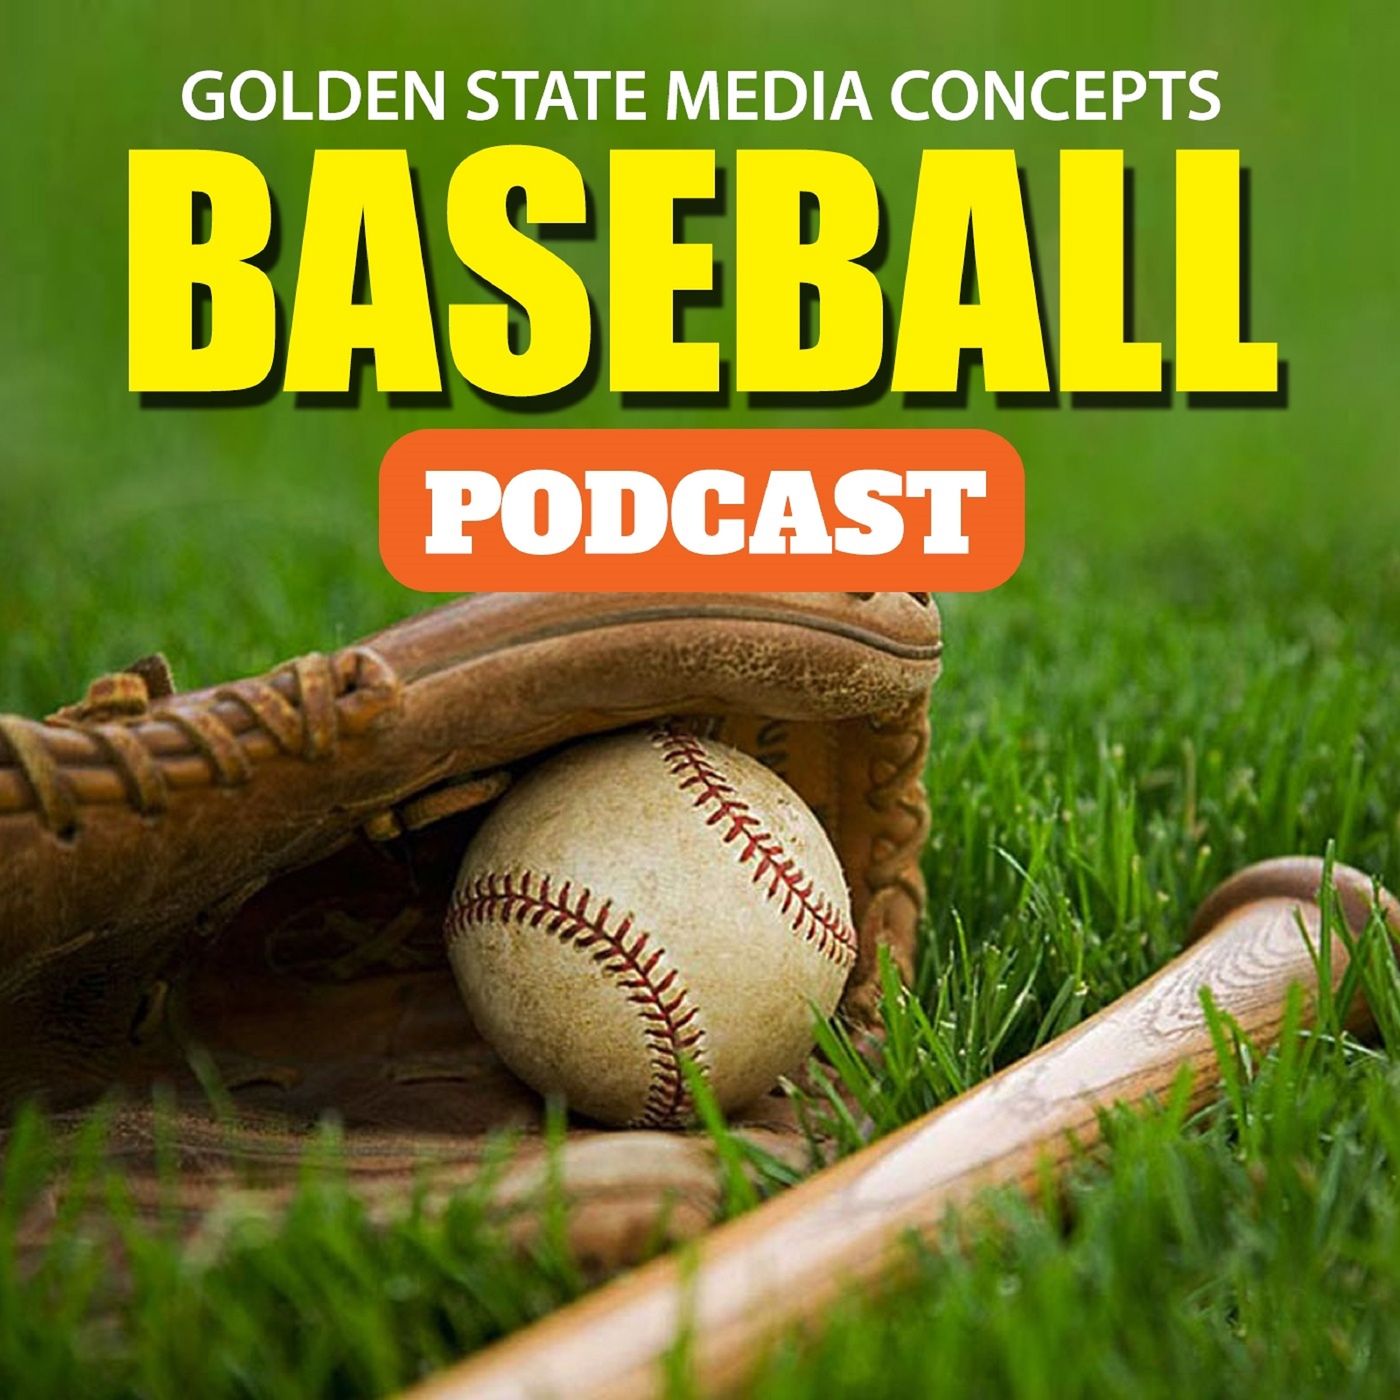 Recapping the games from yesterday, Orioles surging to first place | GSMC Baseball Podcast